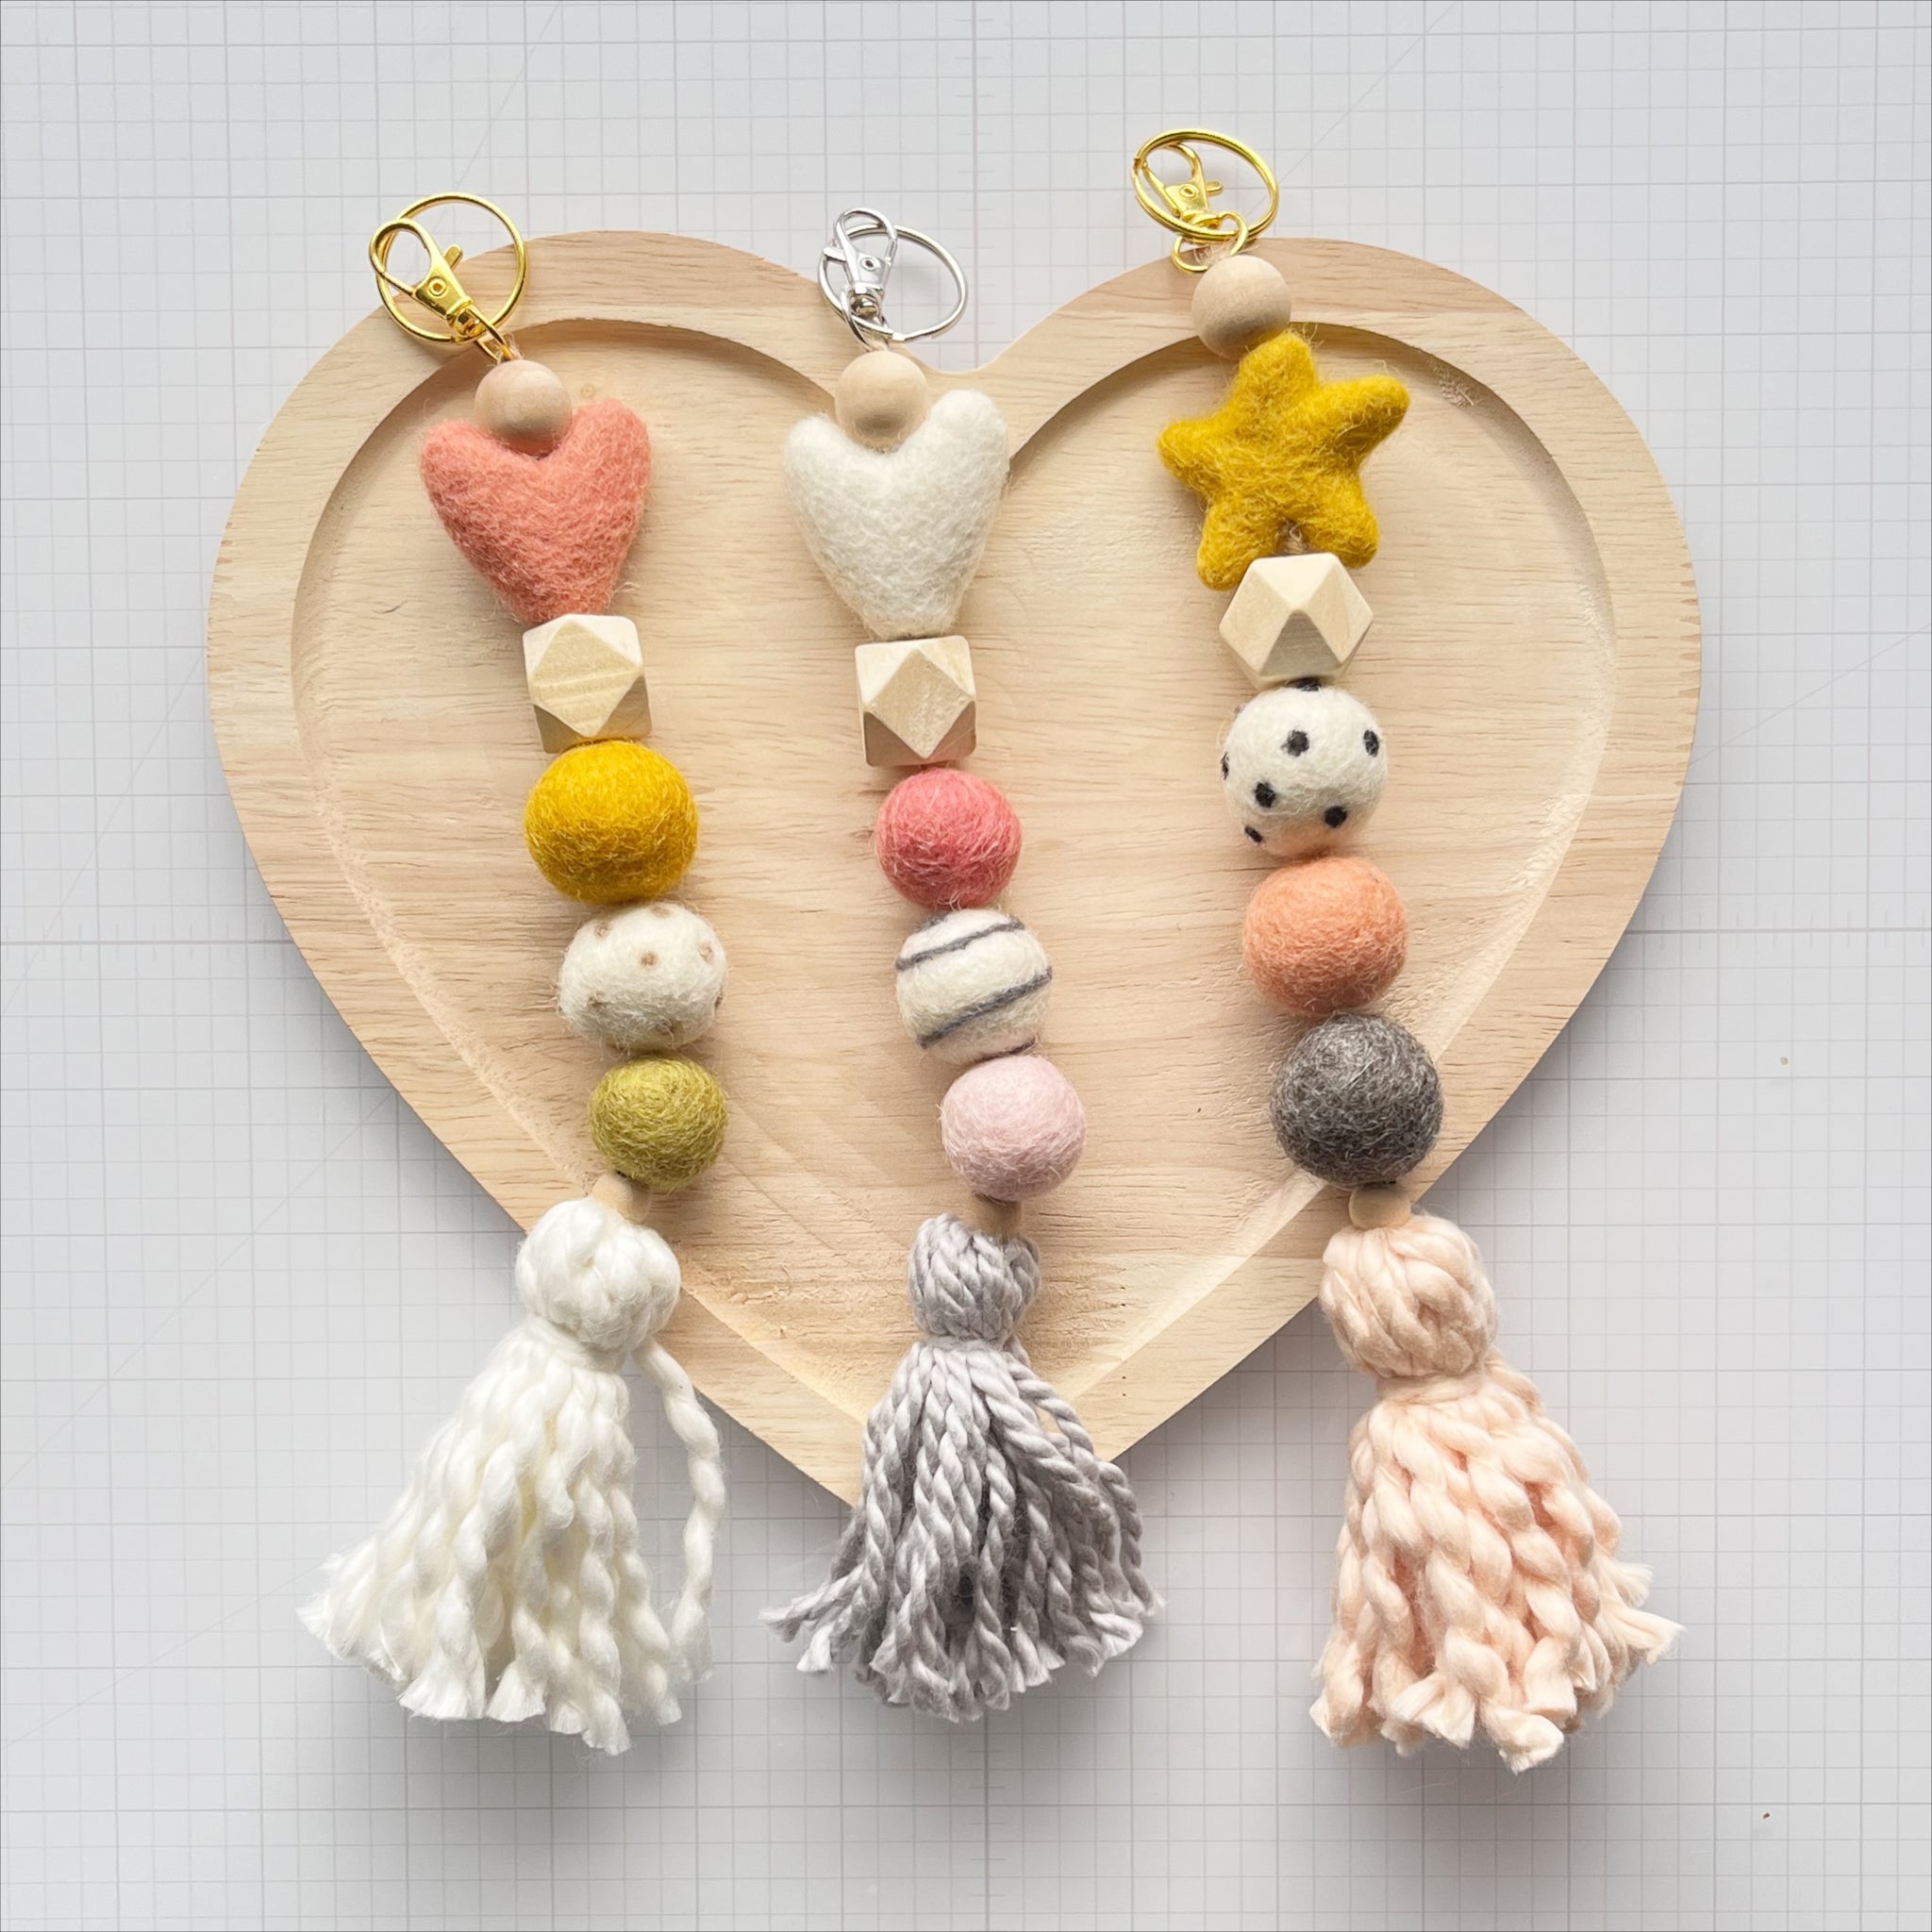 Felt Ball and Wood Bead Keychain Craft Kit With Wool Felted Gold